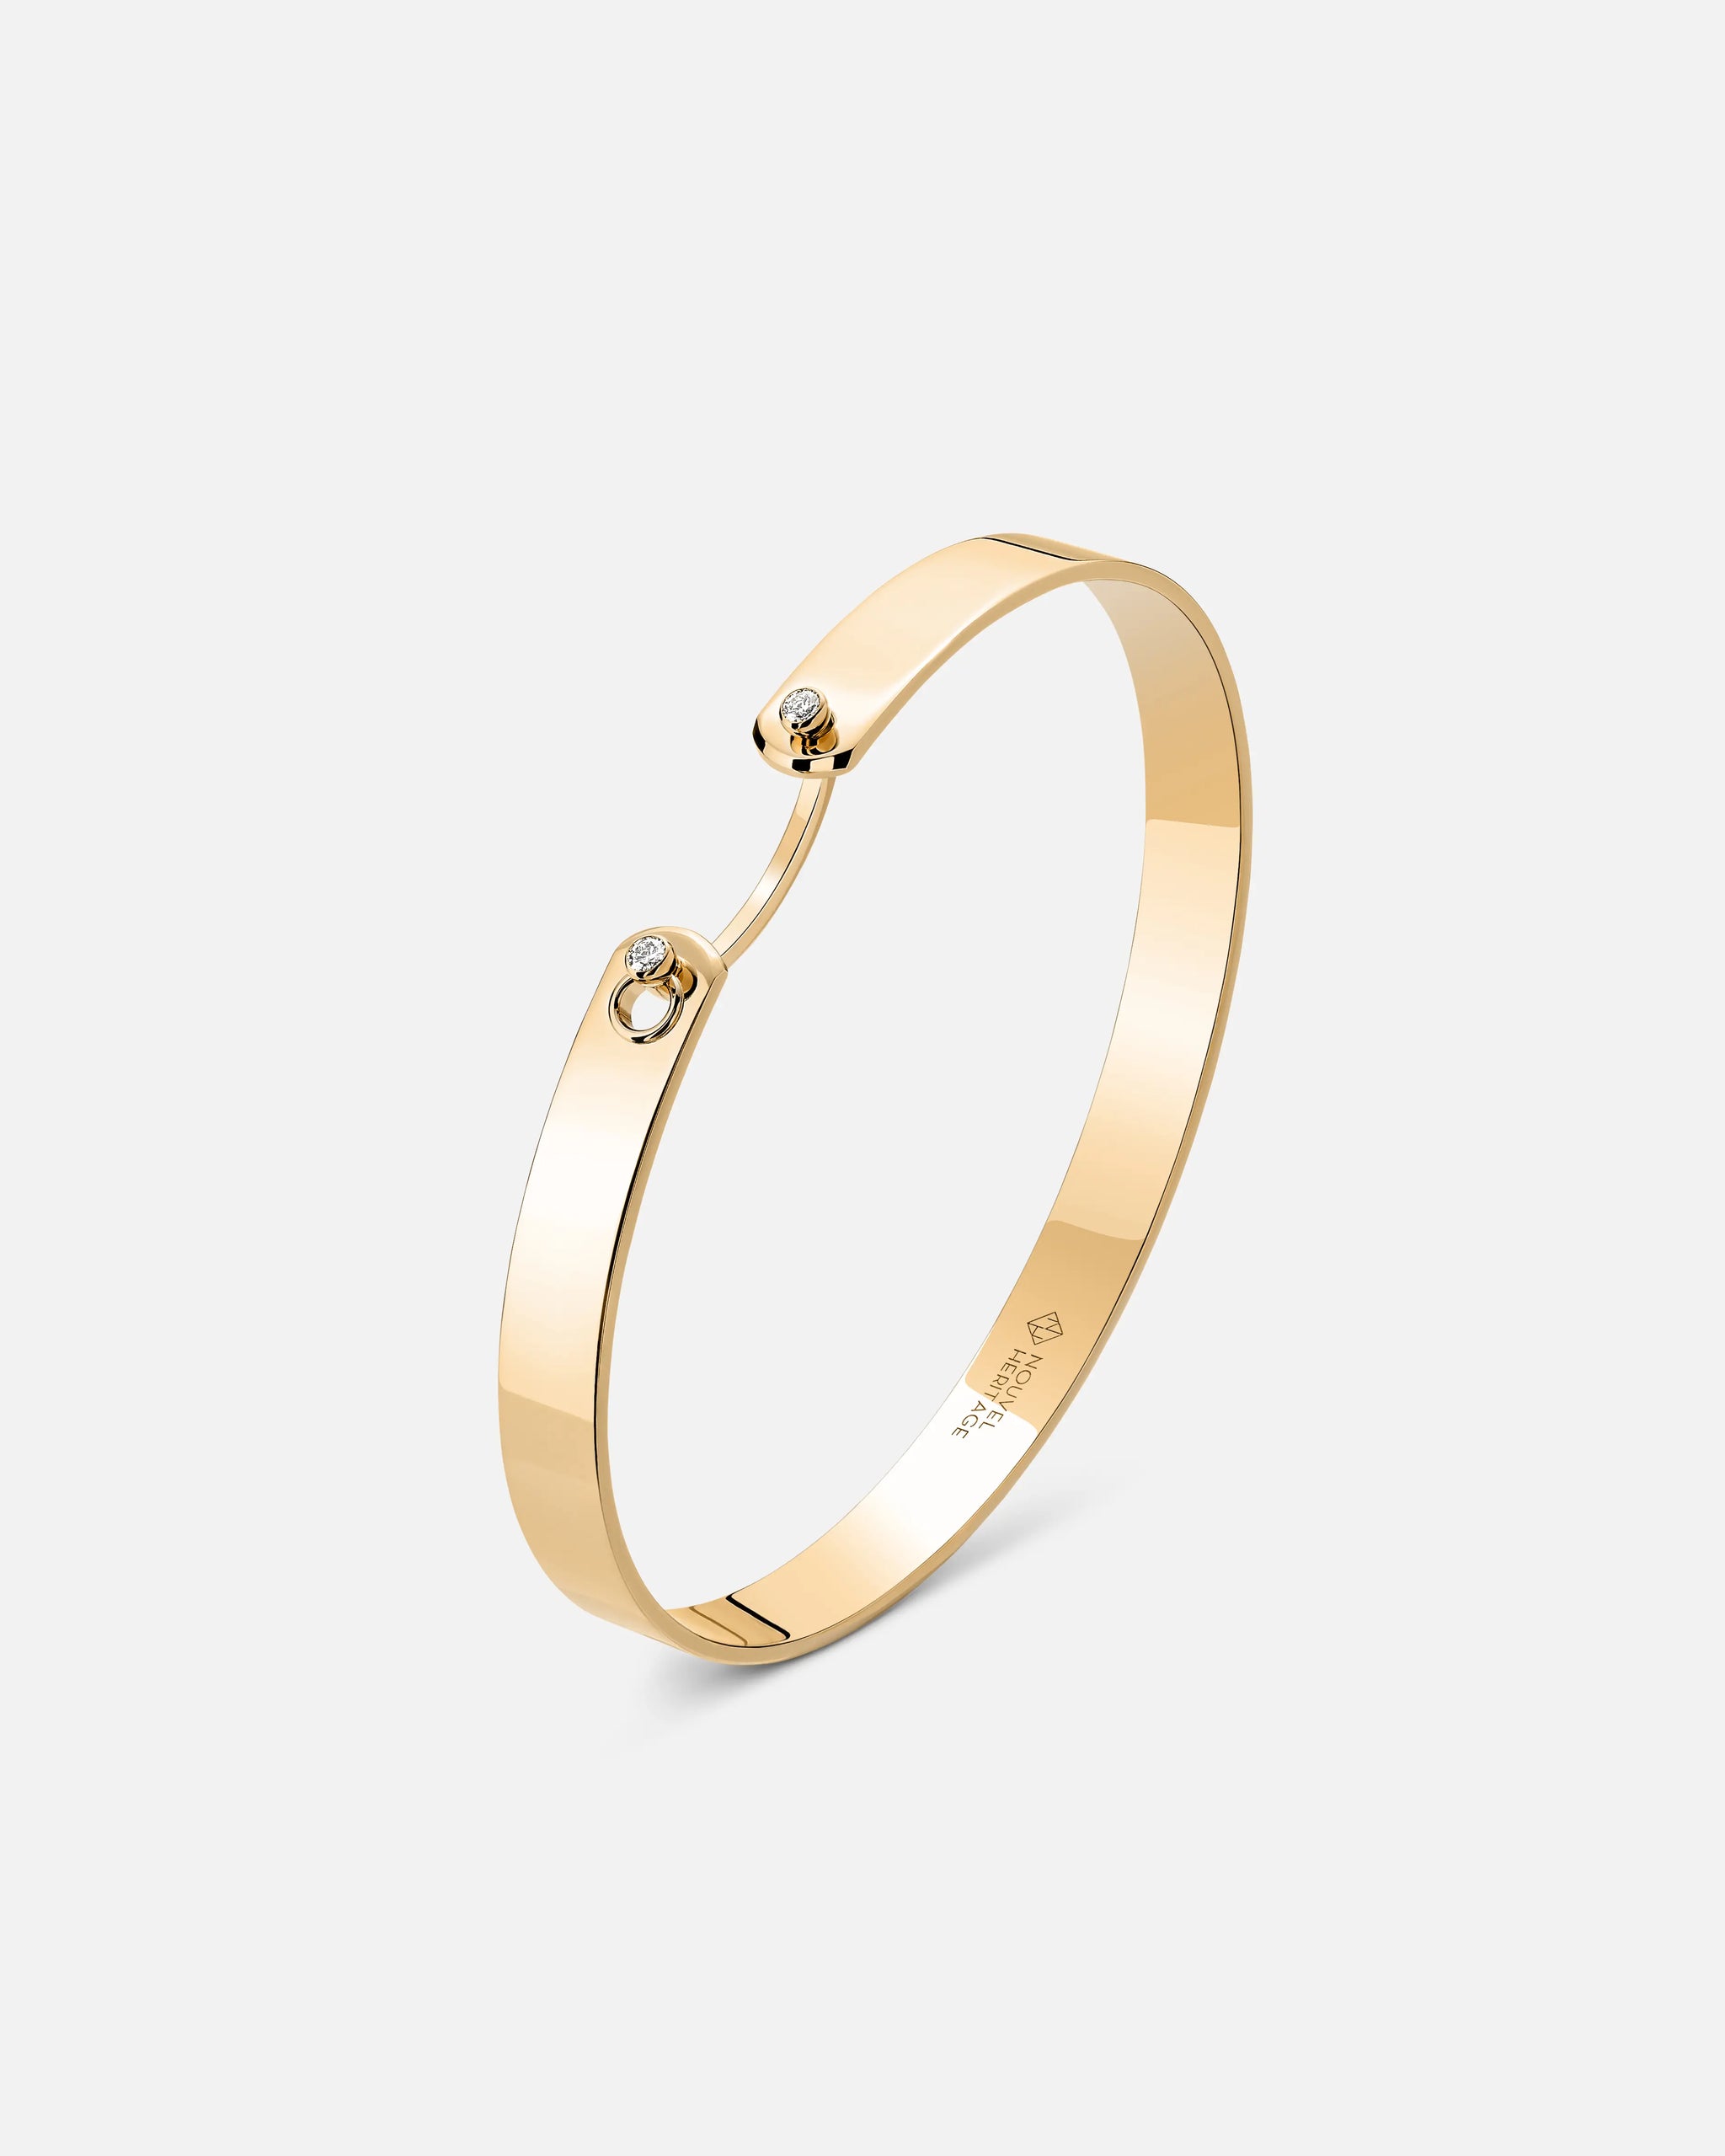 Monday Morning GM Mood Bangle in Yellow Gold - 1 - Nouvel Heritage